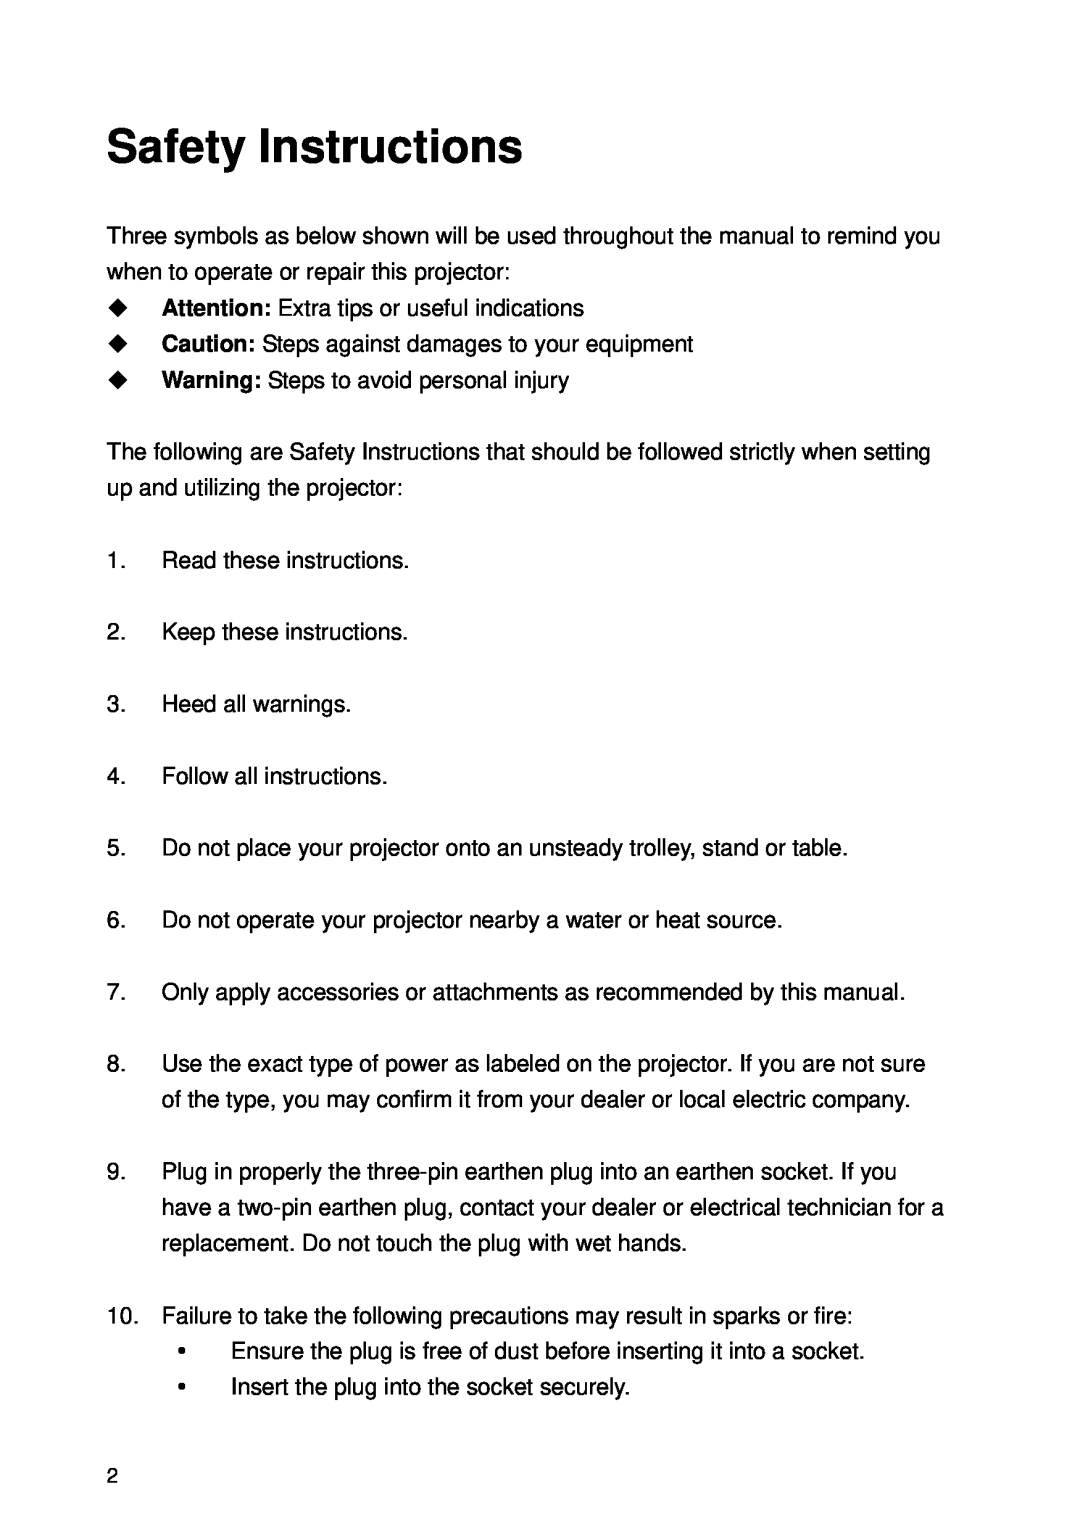 Microtek CX4 manual Safety Instructions 